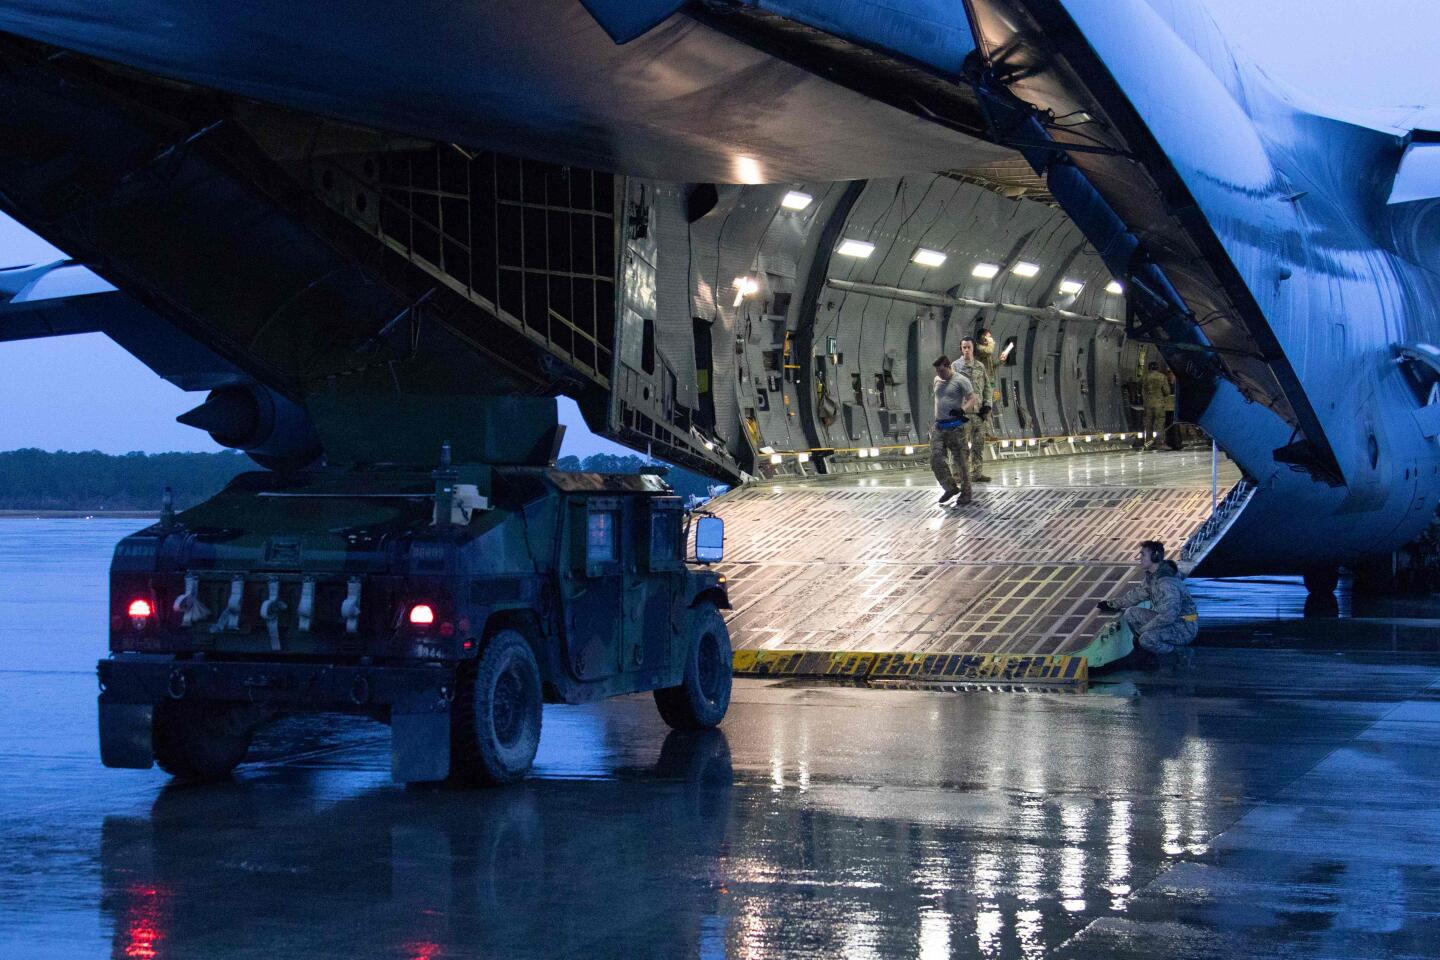 Equipment assigned to 1st Brigade Combat Team, 82nd Airborne Division is loaded into aircraft from Ft. Bragg, N.C.